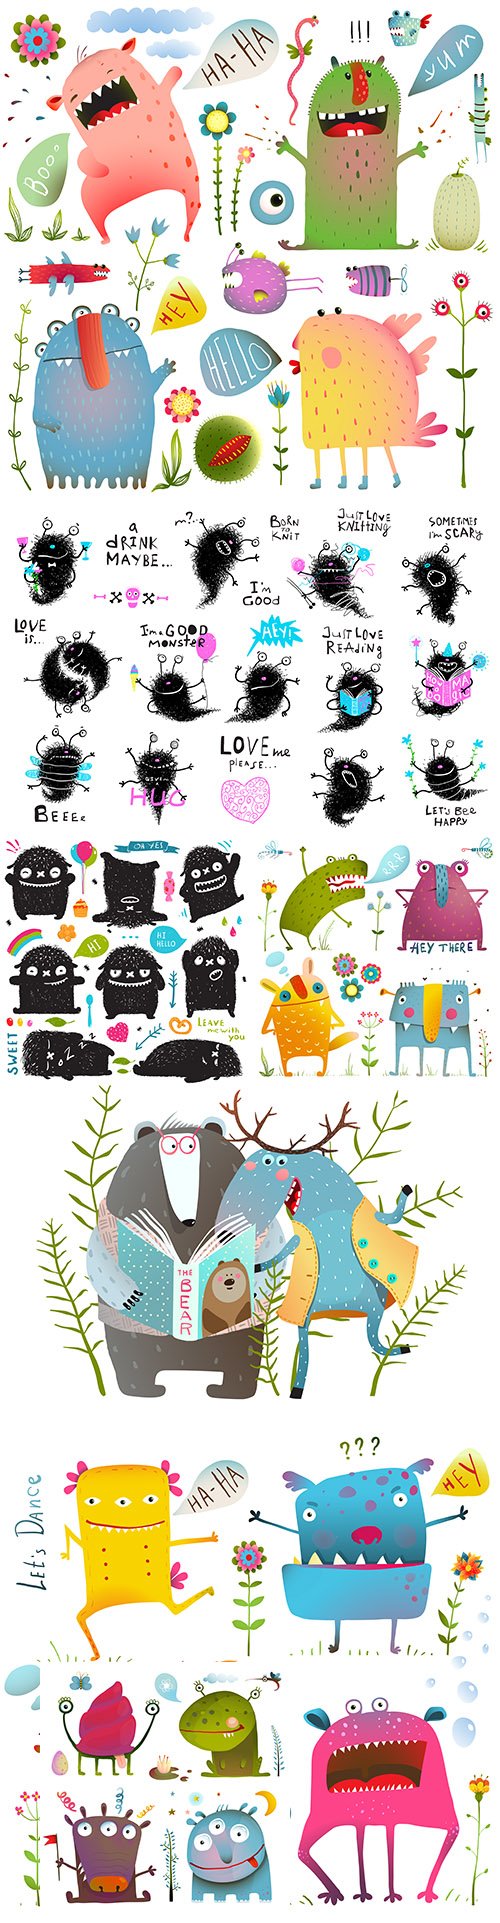 Fun cute little monsters for kids design colorful collection